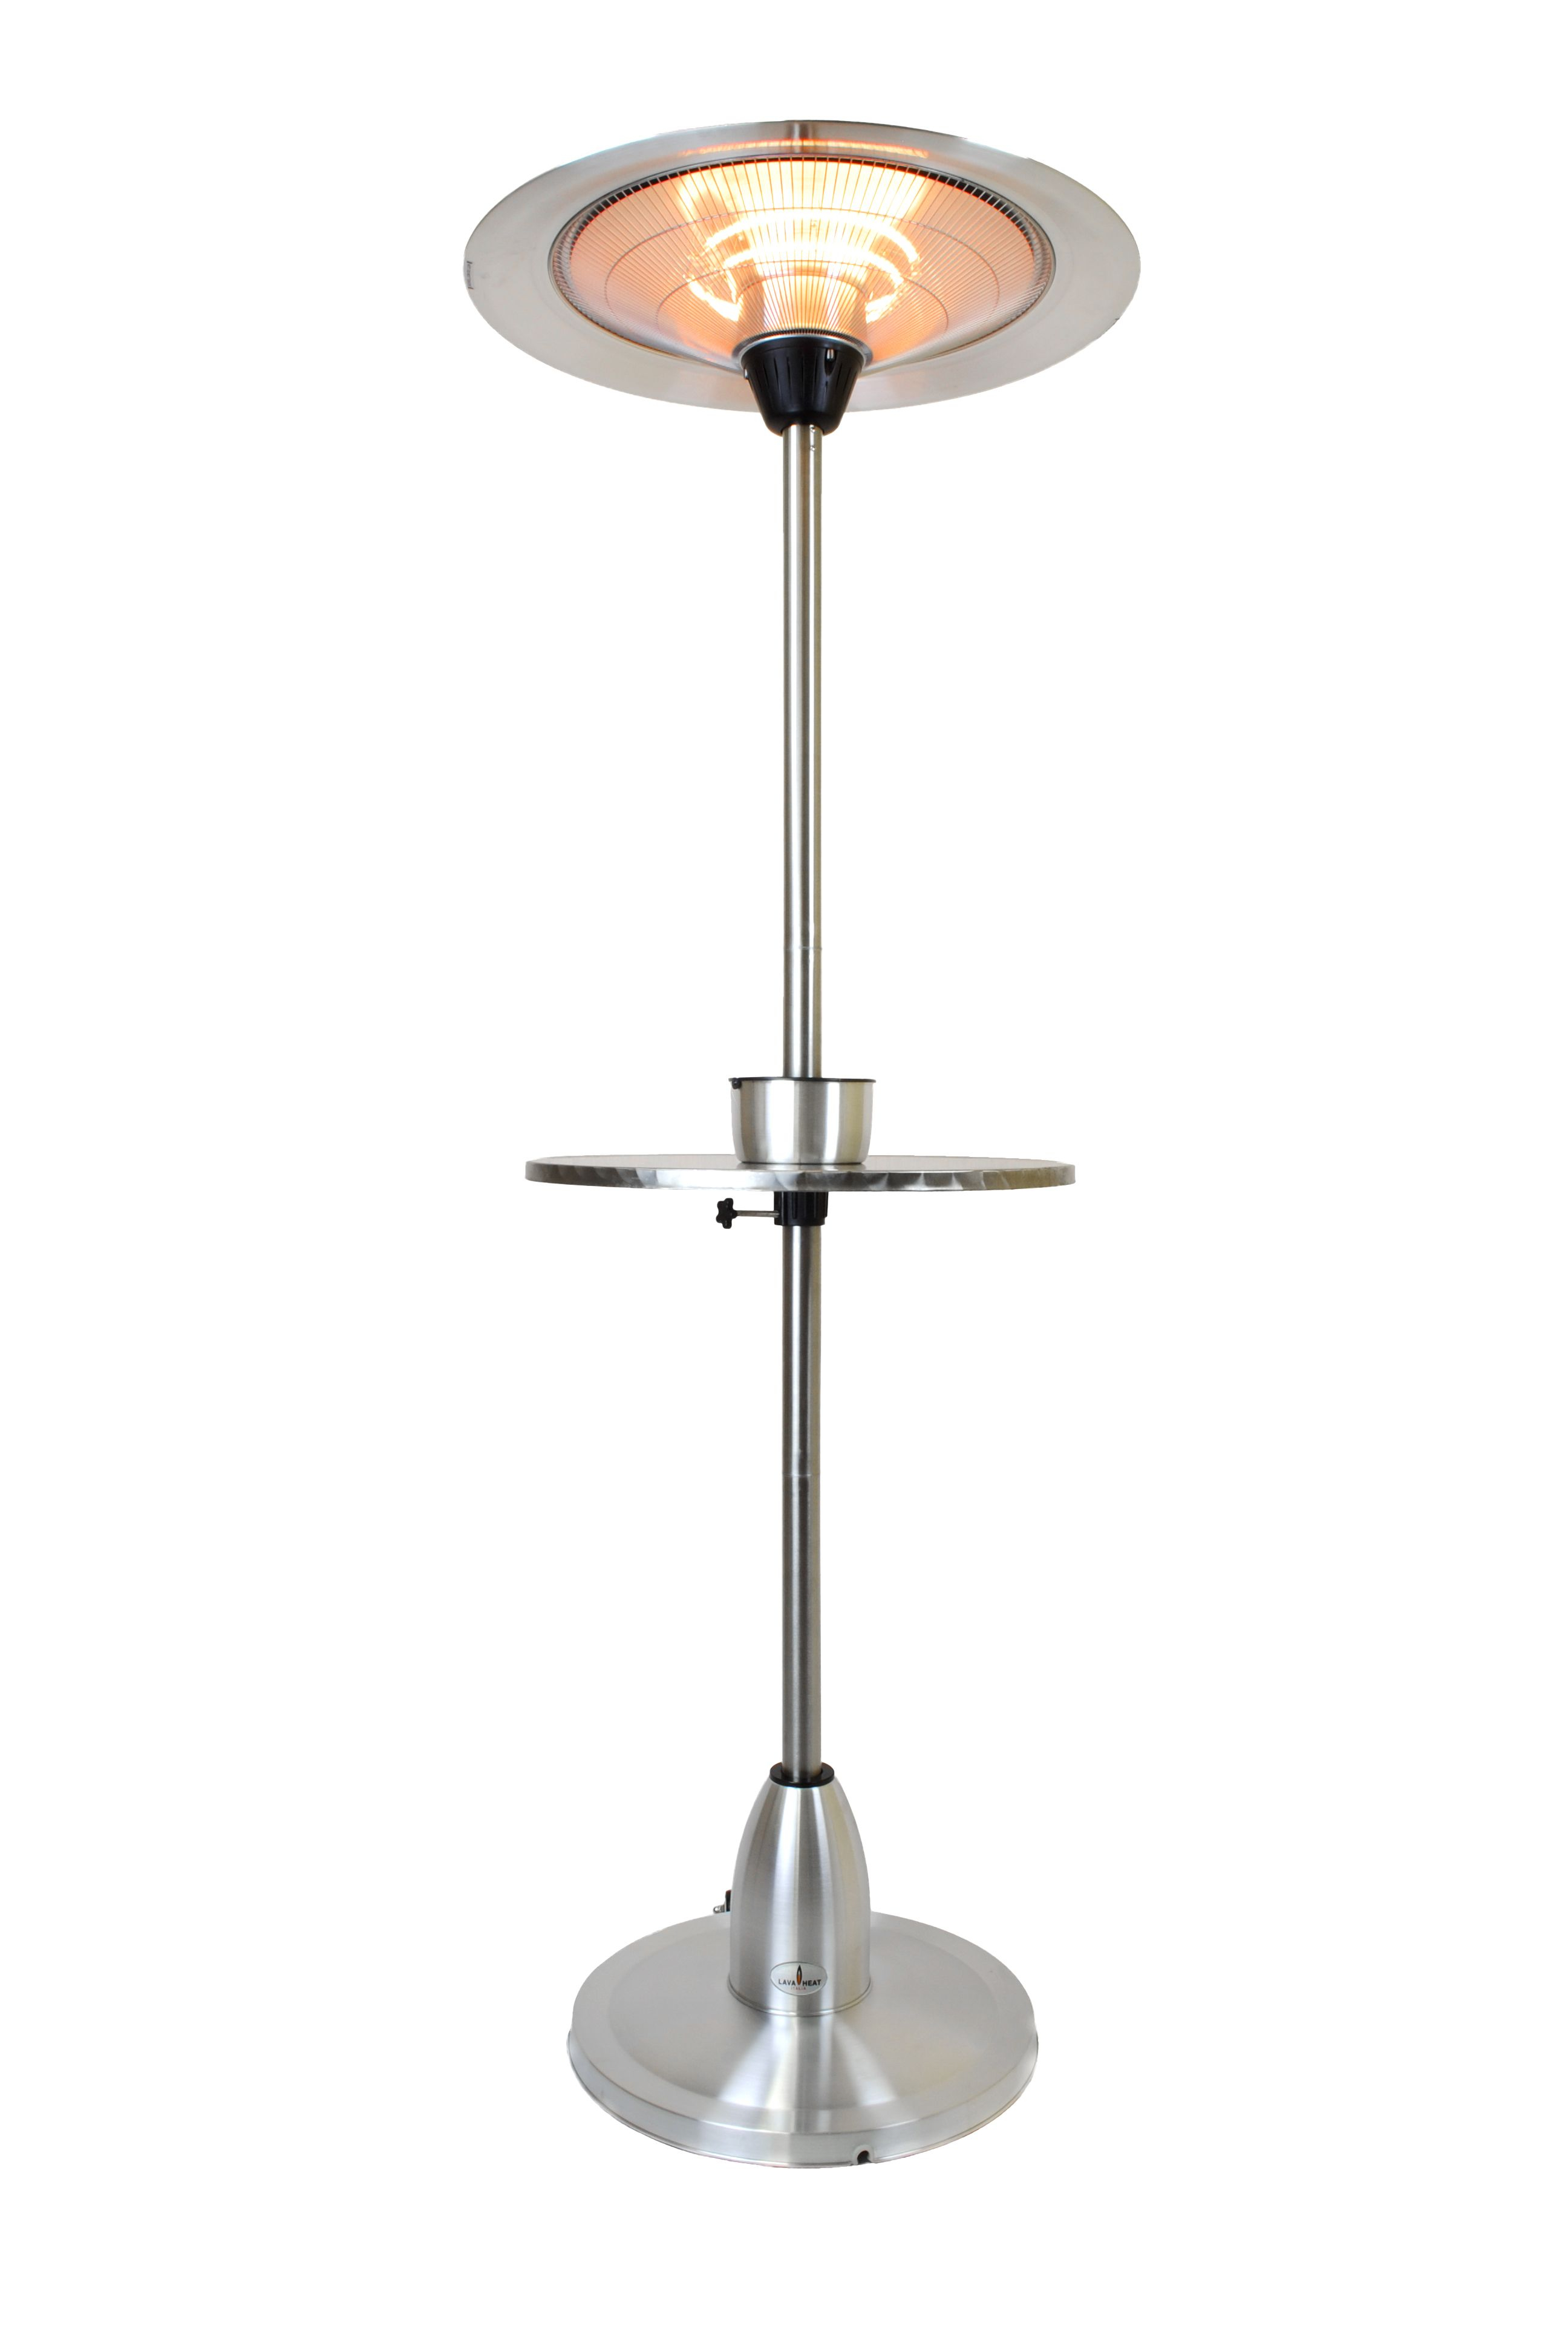 Pub Table Deluxe Patio Heater Stainless Steel Patio in size 2592 X 3872